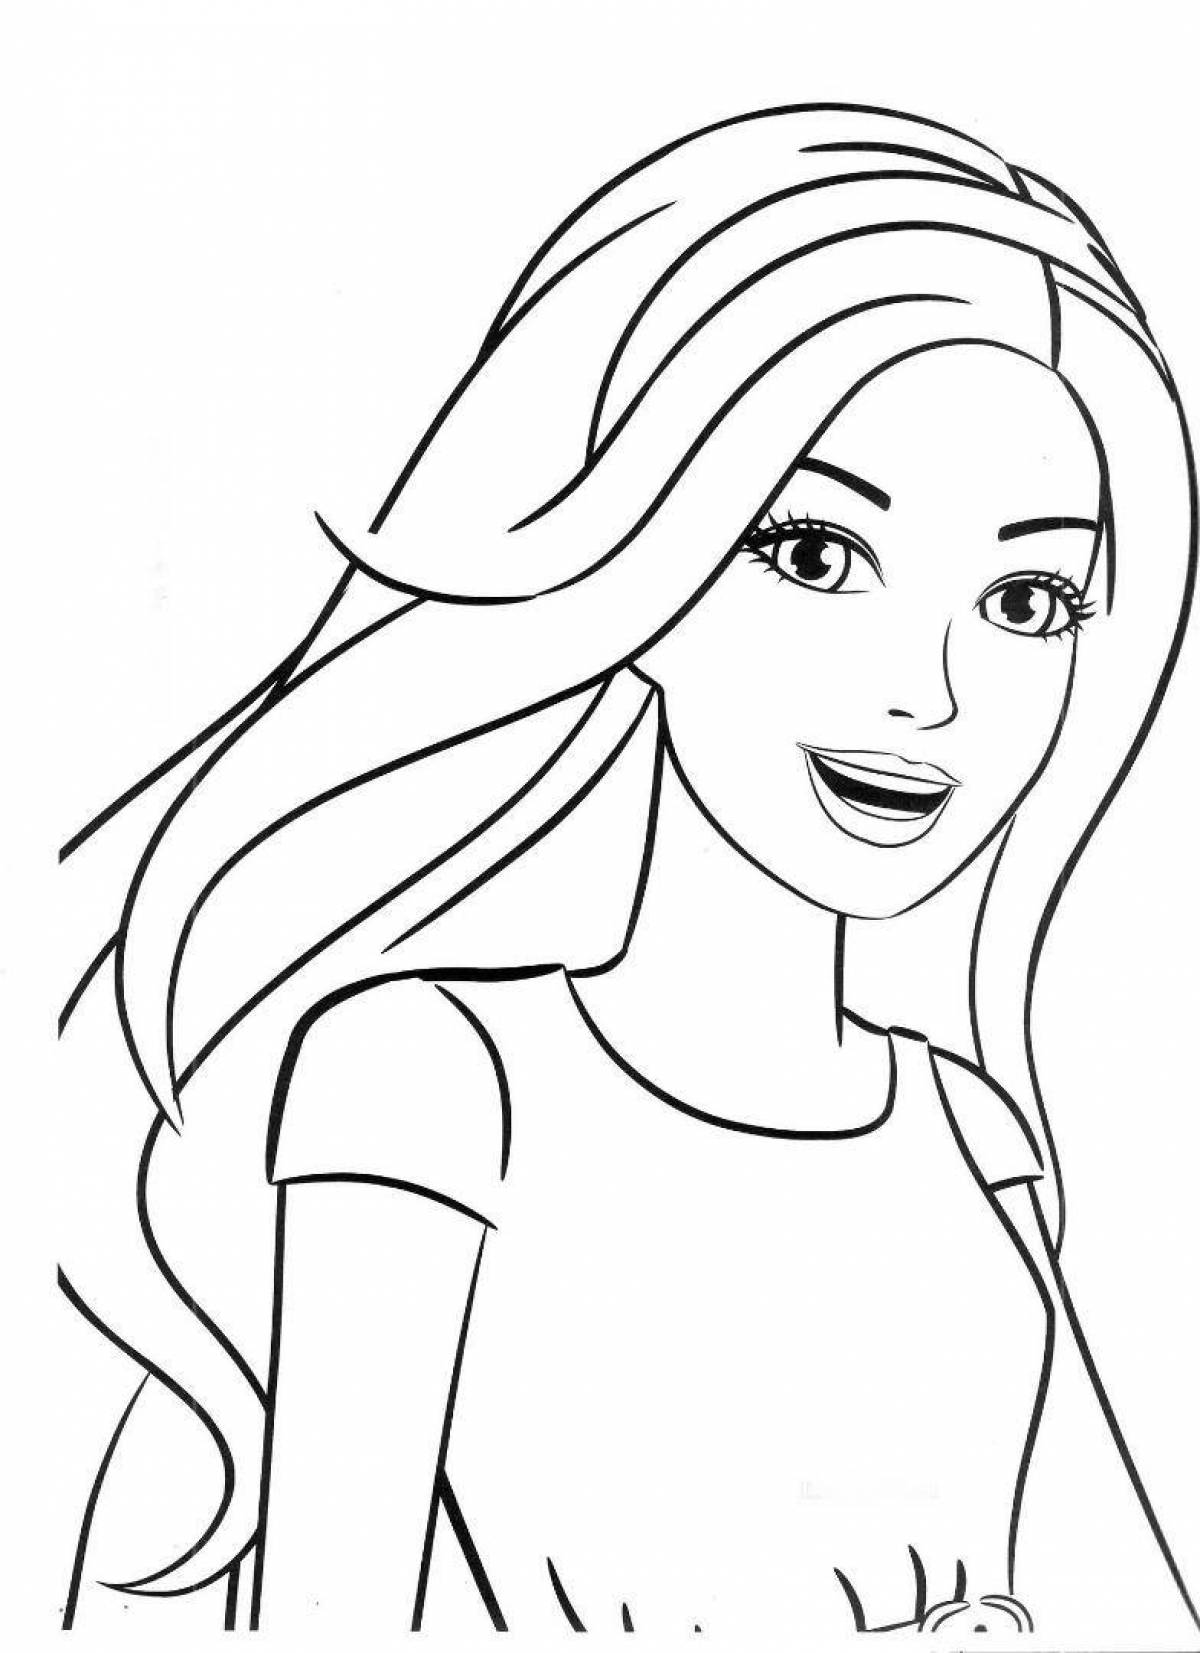 Awesome barbie face coloring page